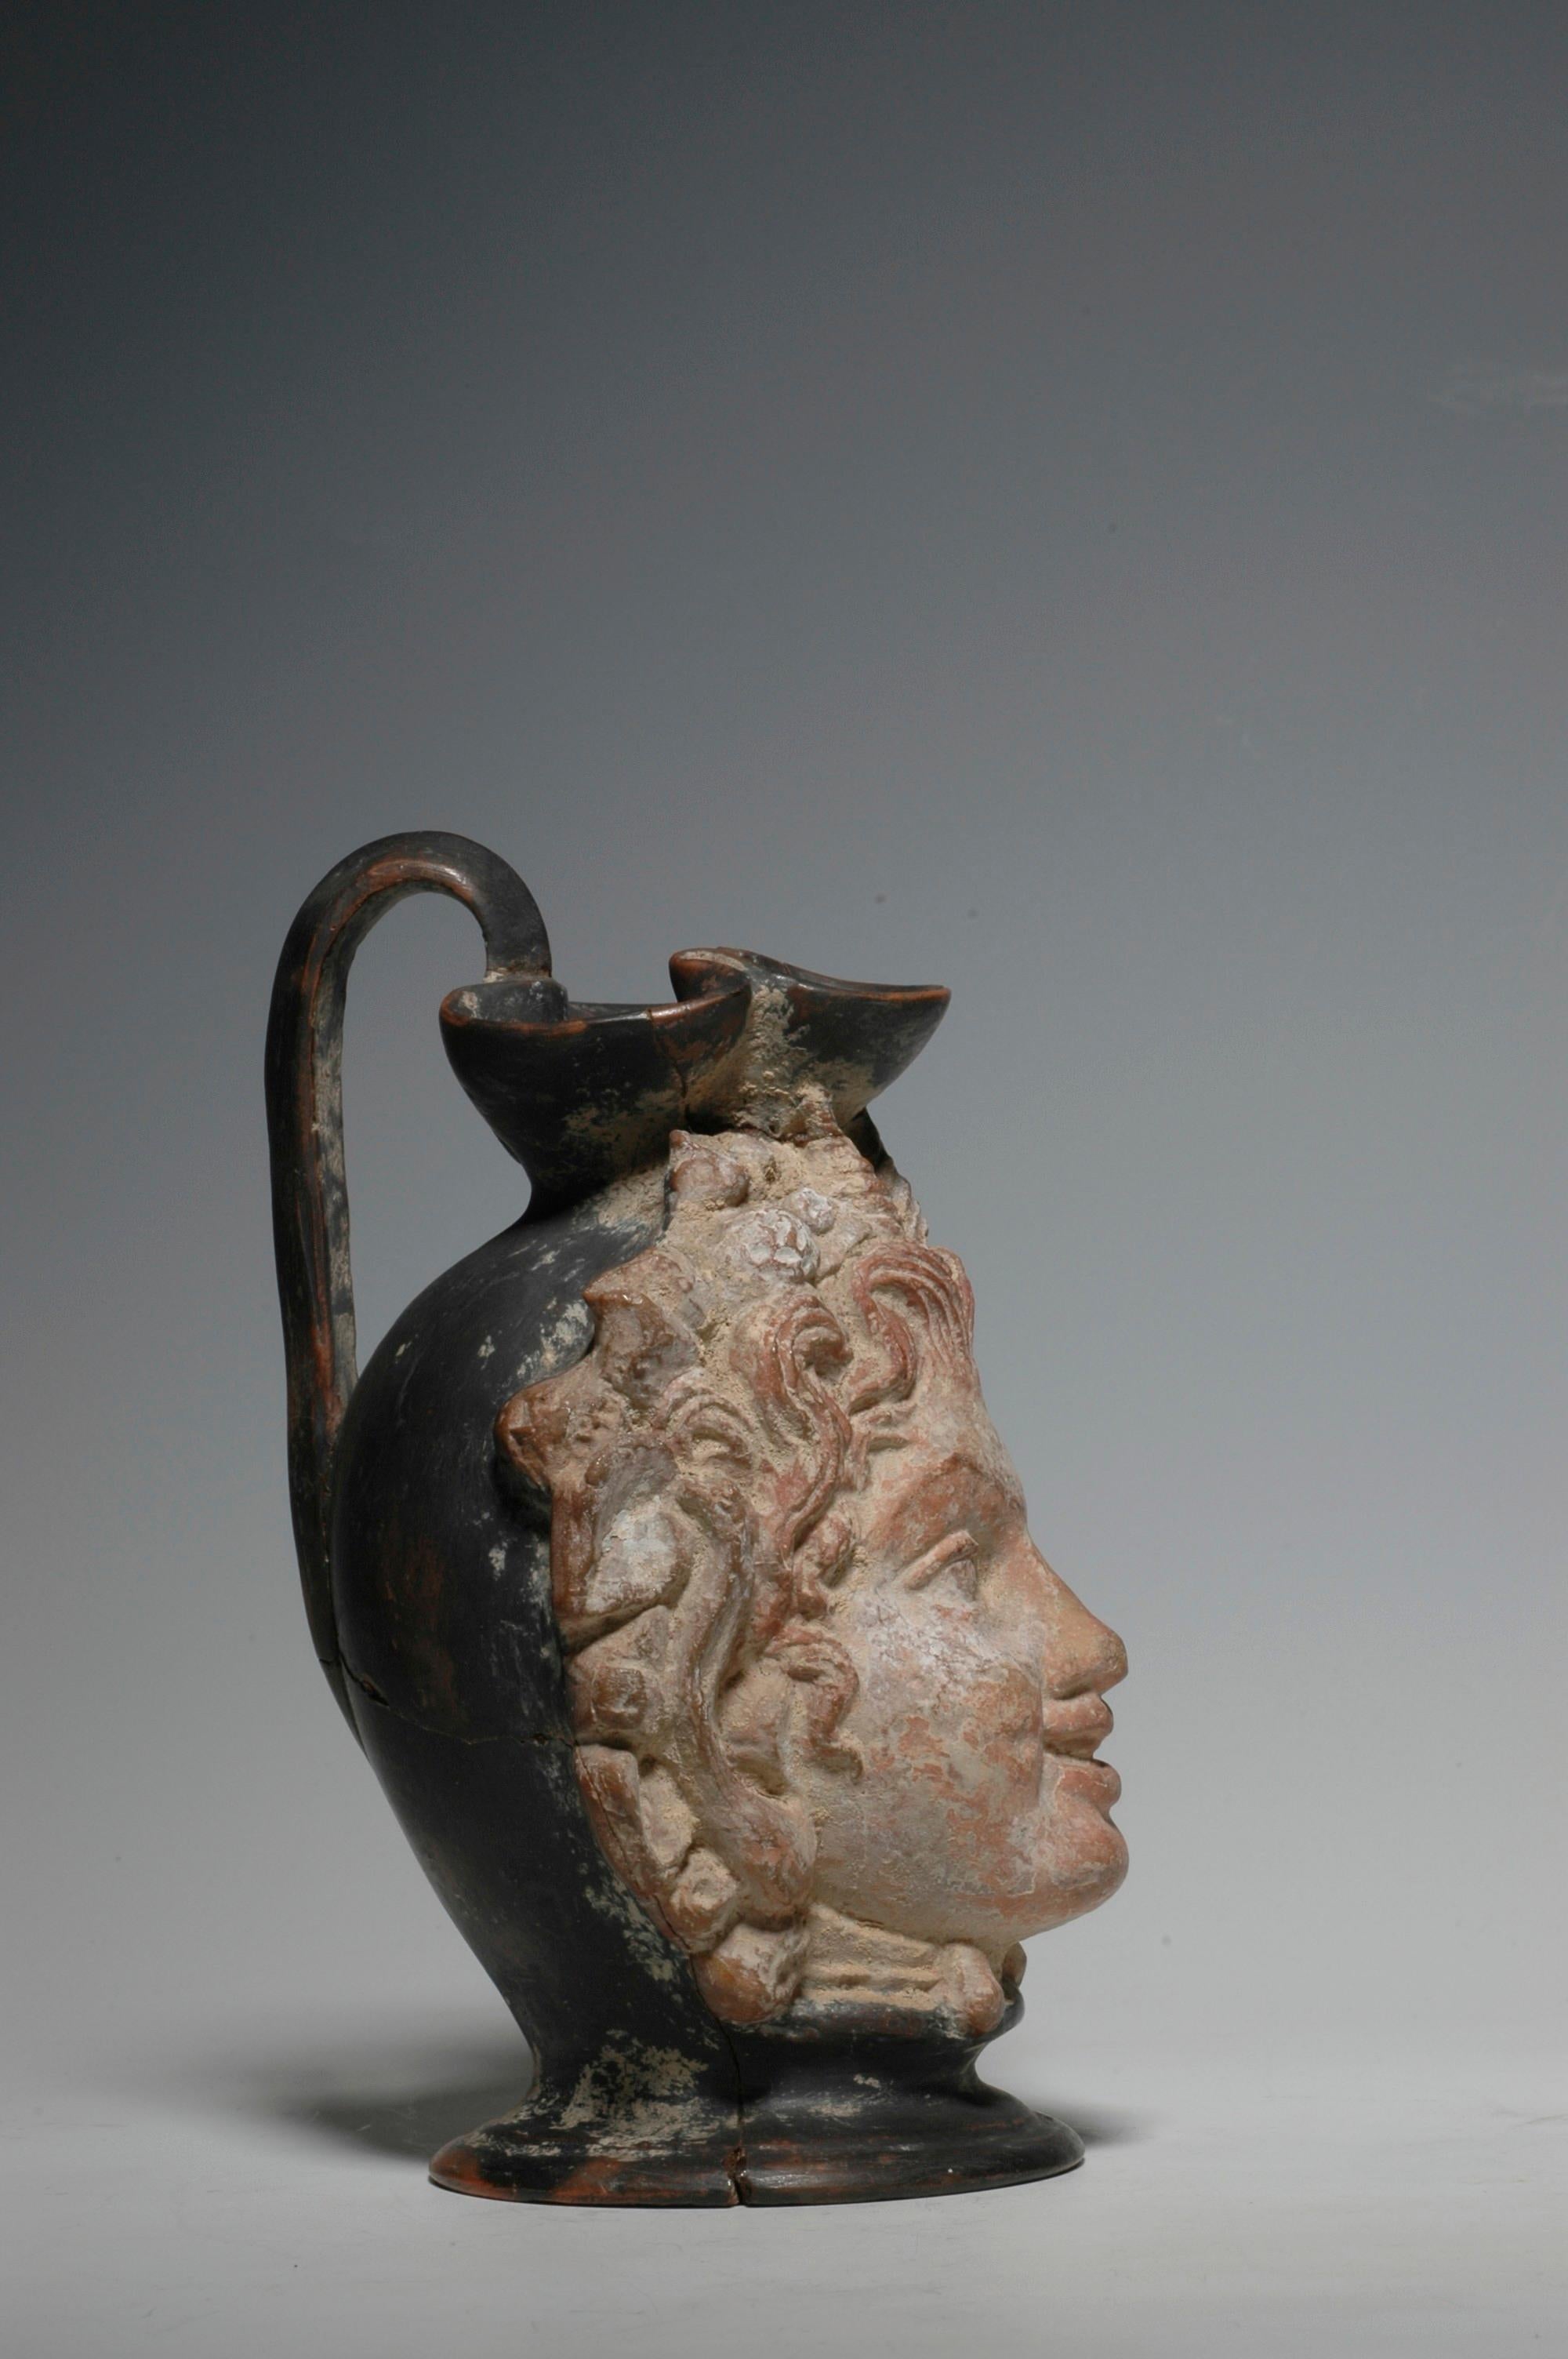 Western Greek trefoil head vase with a very lively face of a faun and well preserved polychrome, circa 4th century BC.
The vase is actually a trefoil oinochoe with a handle at the back of the head. A very unusual and rare piece. Provenance: ex. the